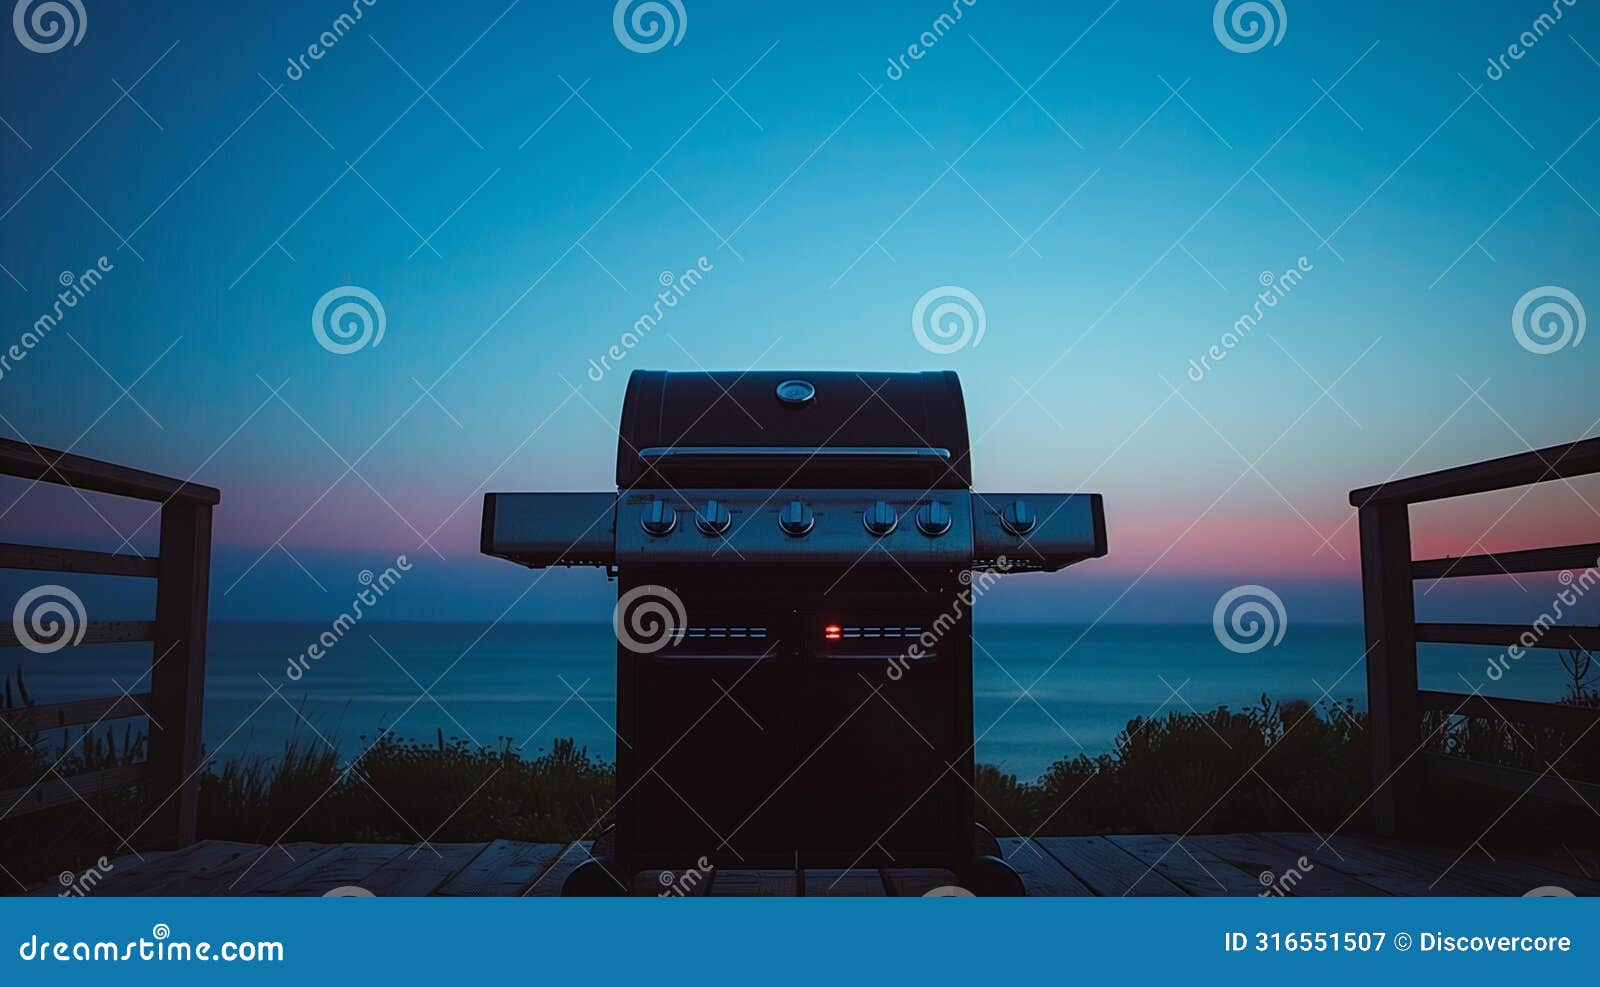 twilight grilling: oceanfront barbecue at dusk